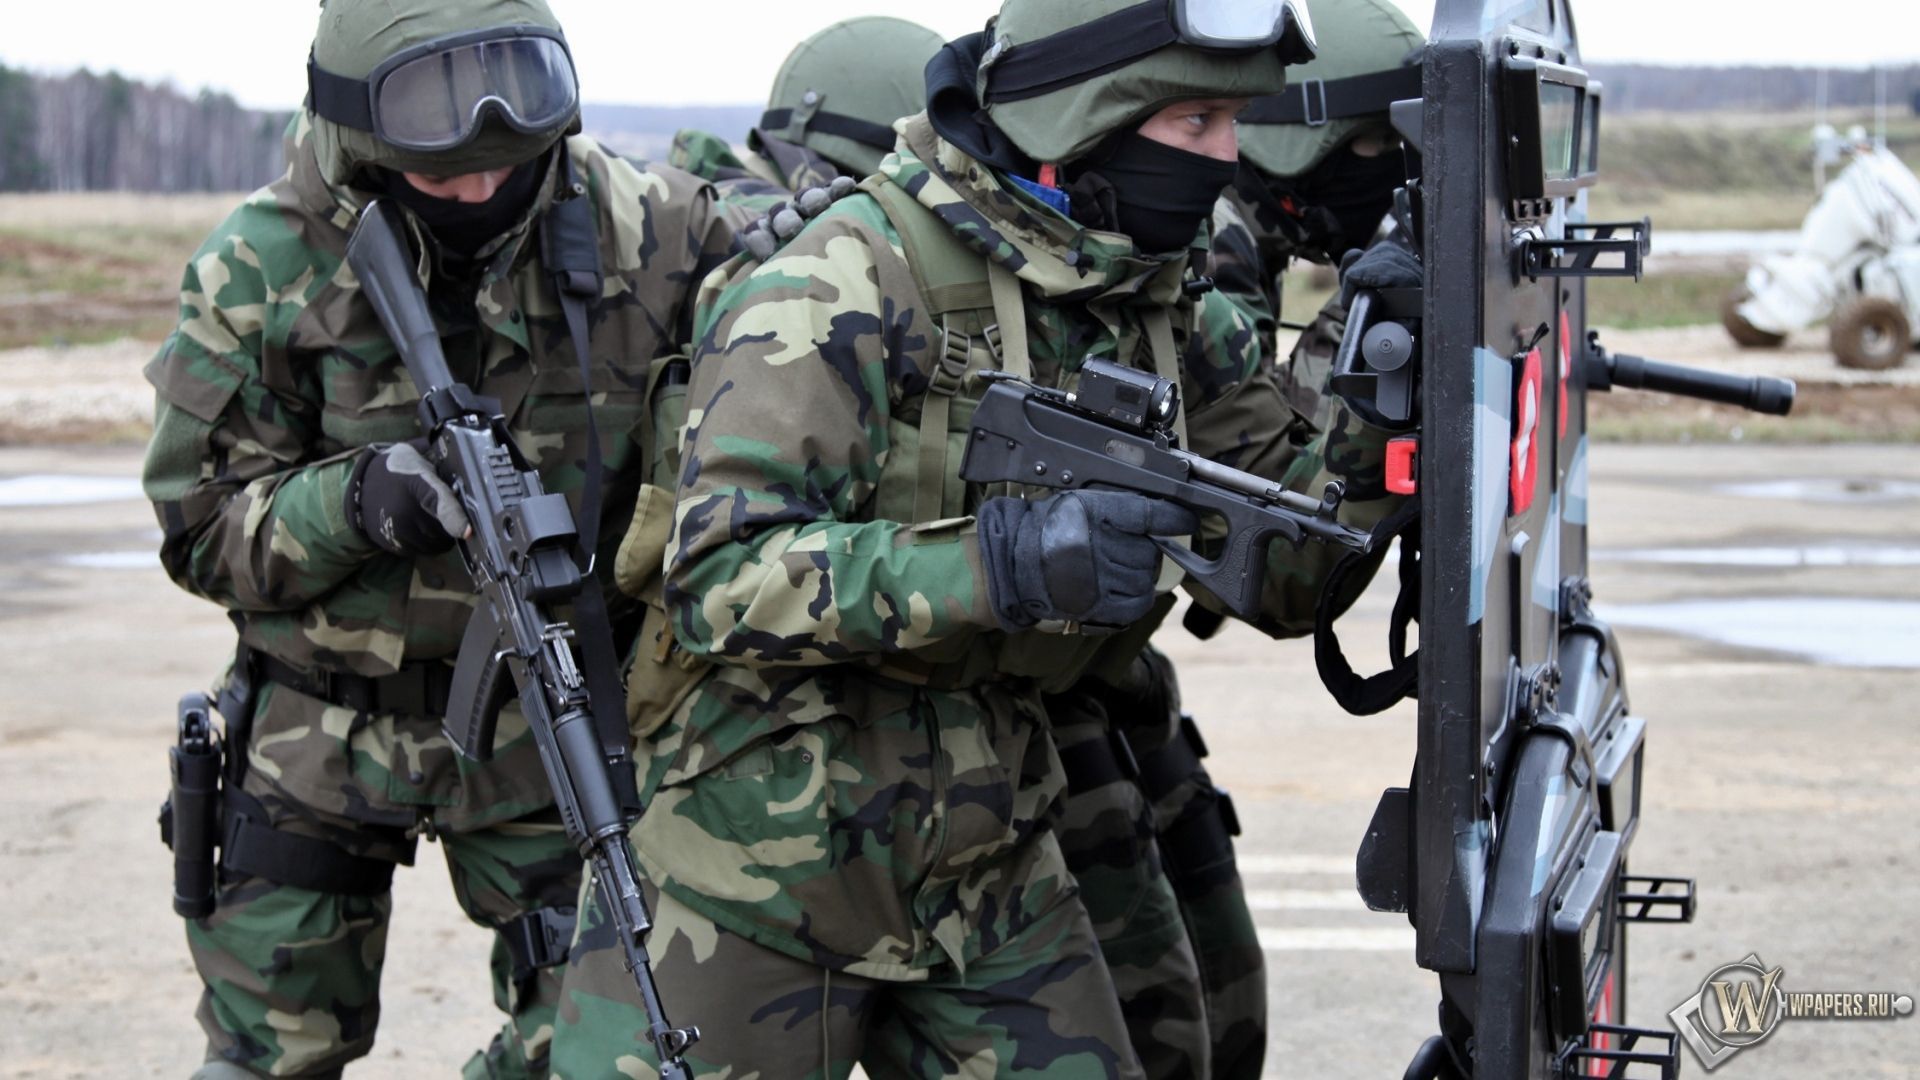 Russian special forces wallpapers and images - wallpapers